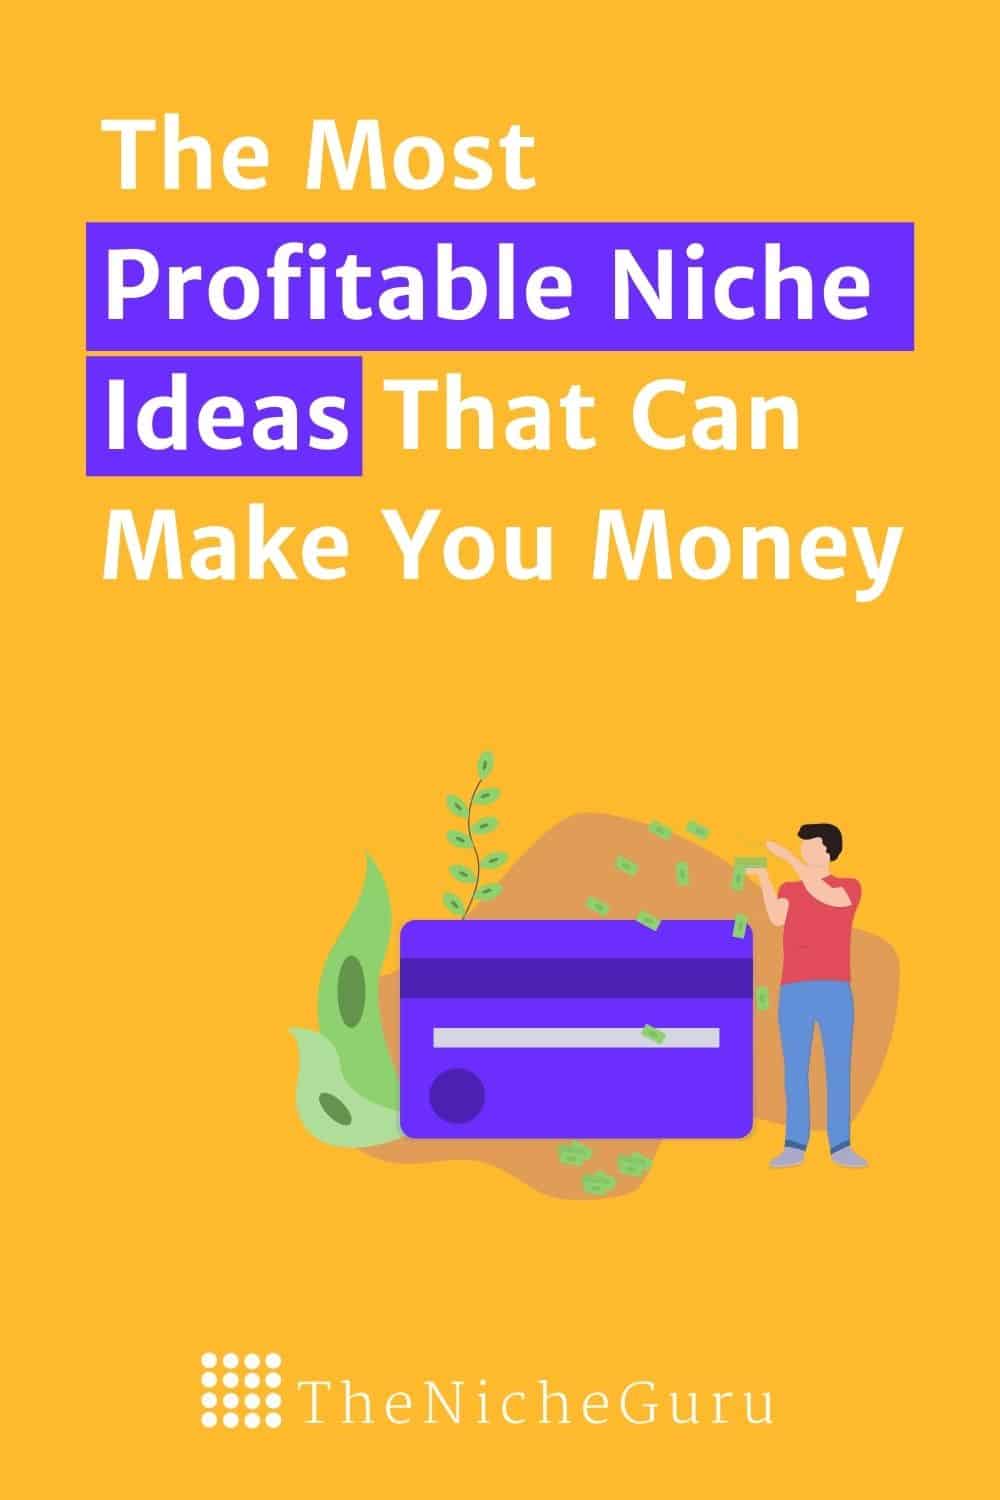 Learn some of the most profitable niche ideas that can make you money in 2020. | Profitable Niches | Niche Ideas | #Niche #NicheIdeas #ProfitableNiches #MakeMoney